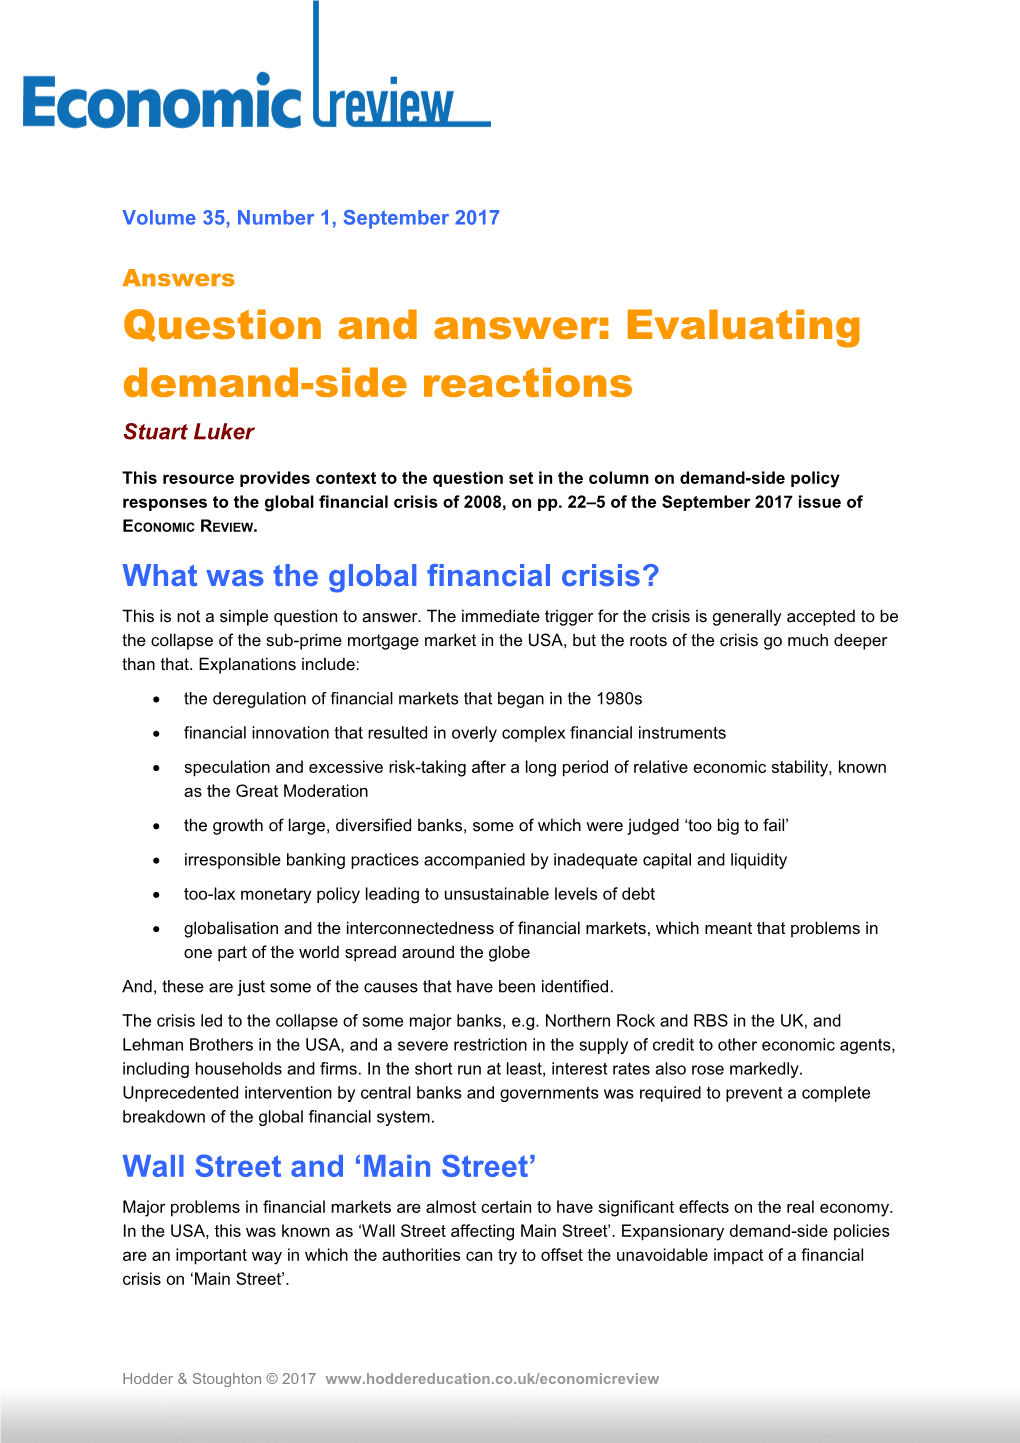 Question and Answer: Evaluating Demand-Side Reactions